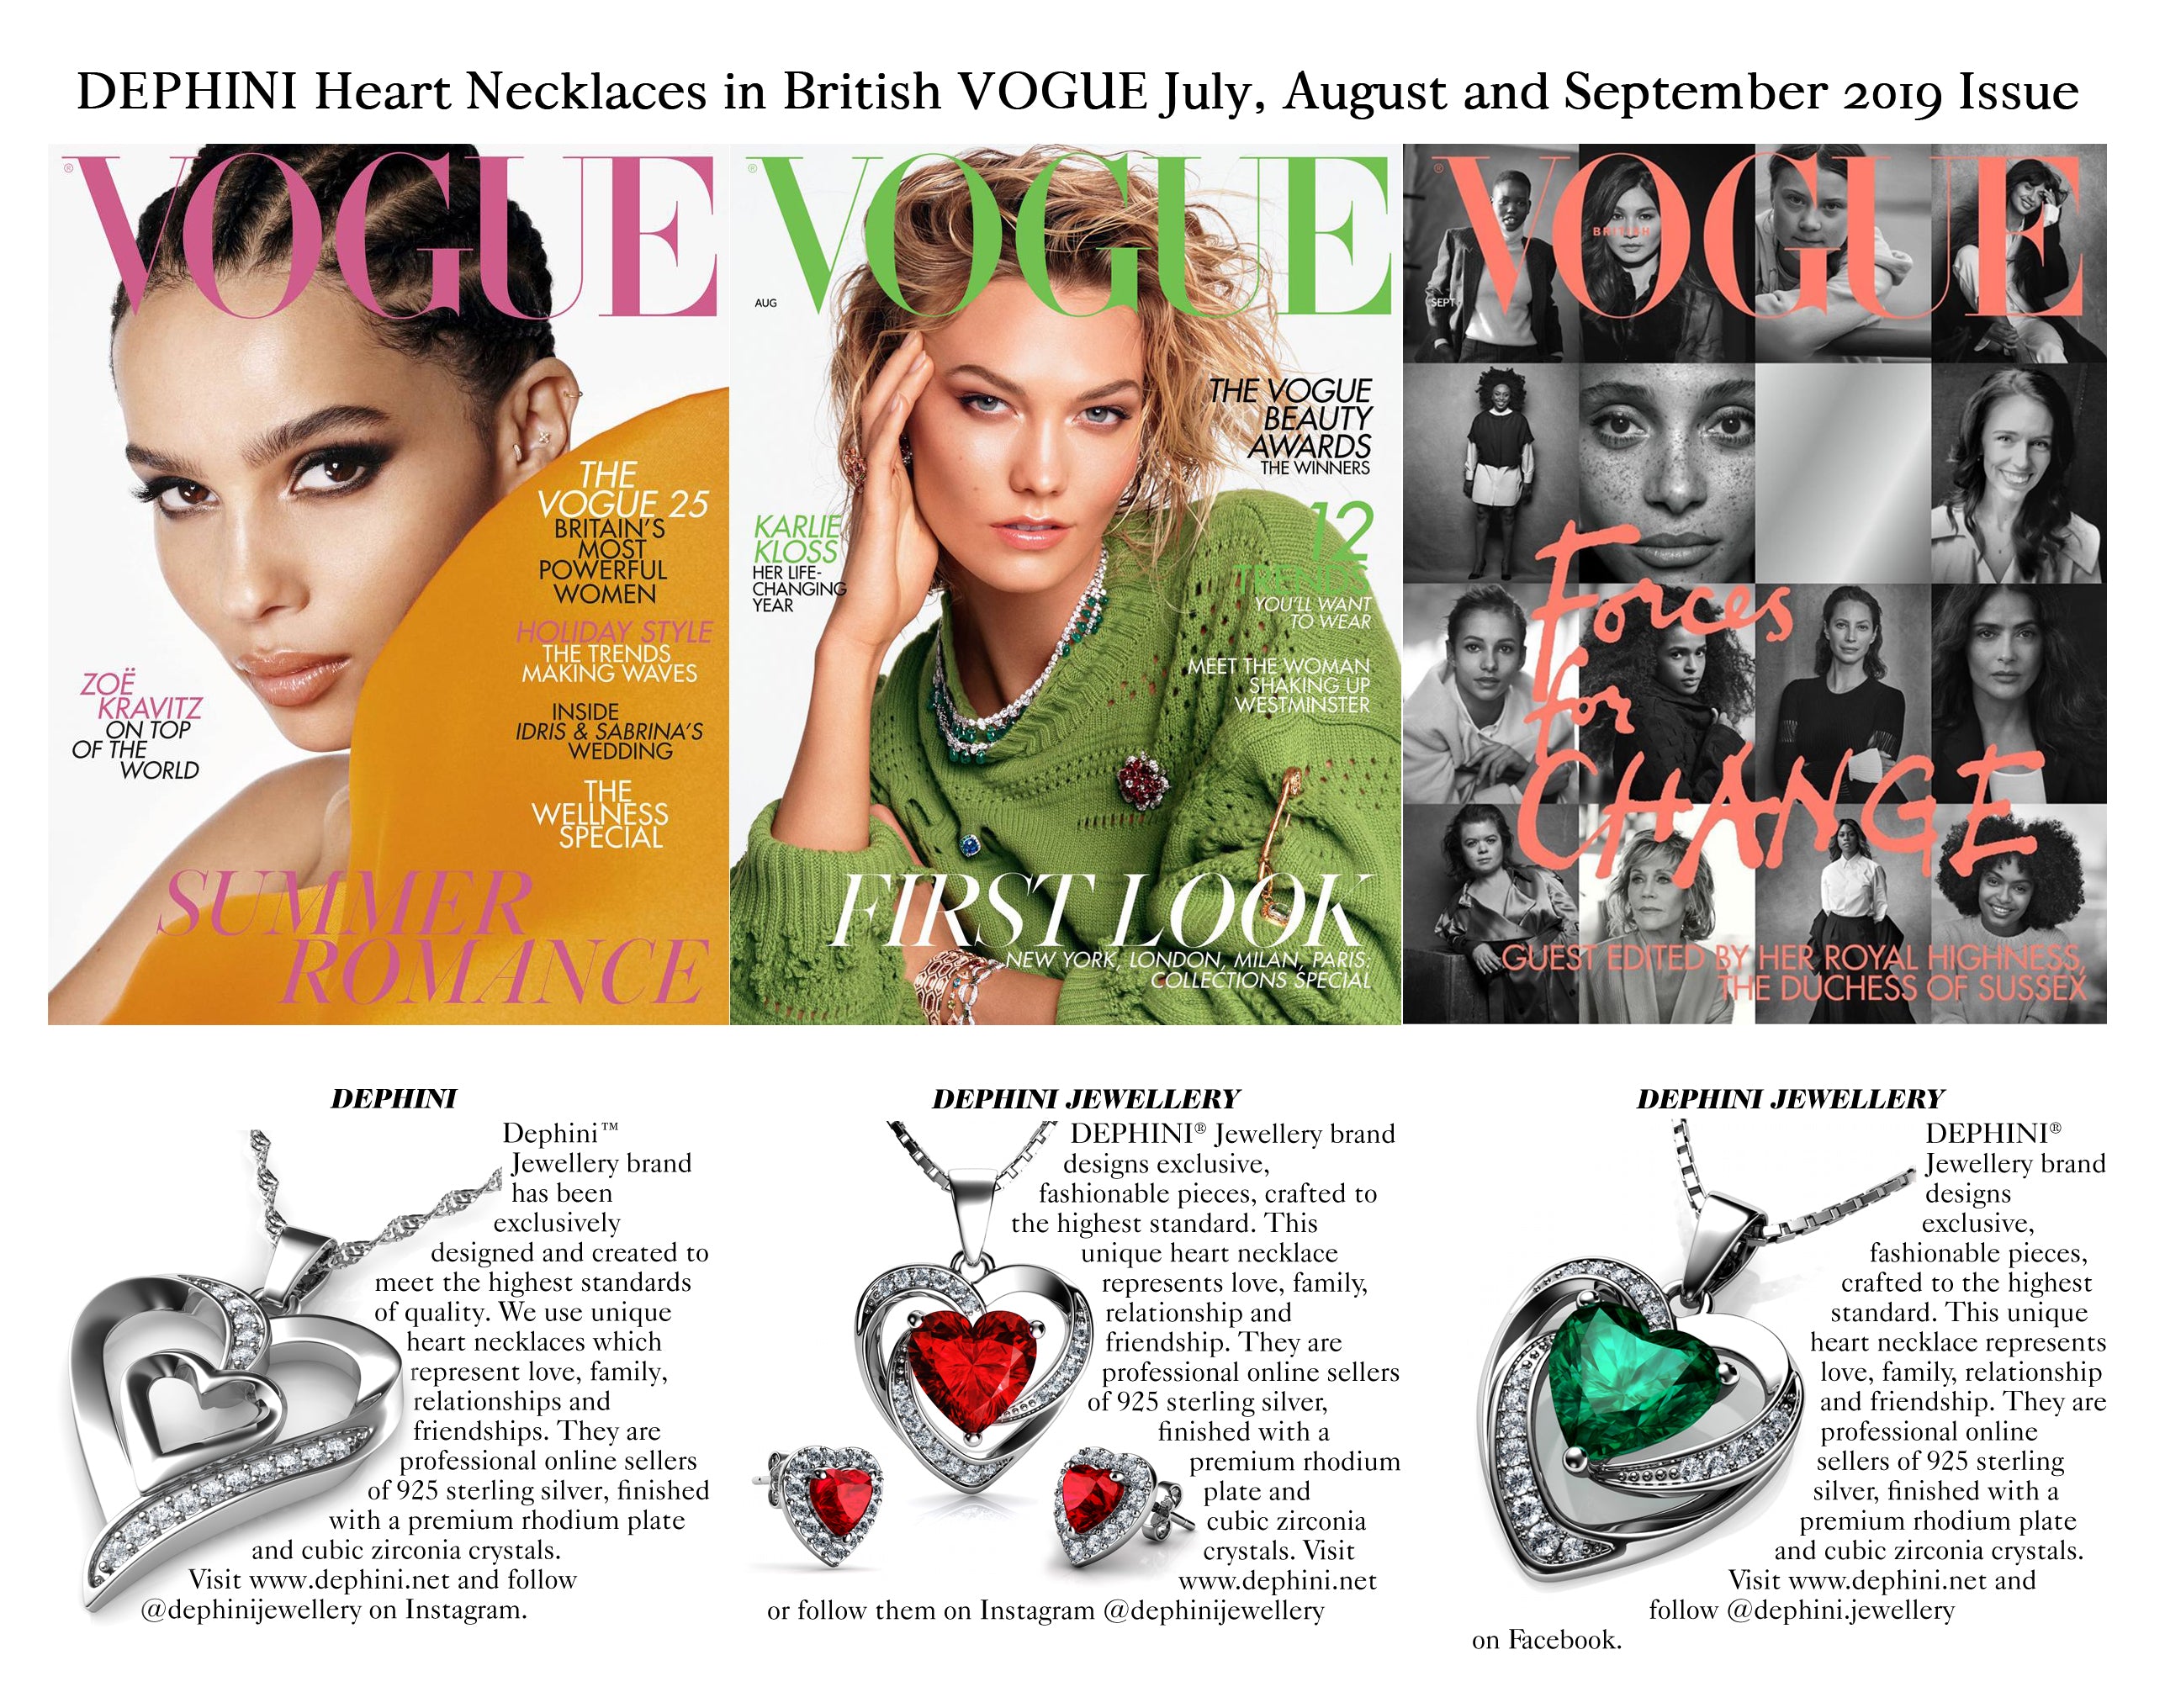 Vogue dephini jewellery heart necklaces reference